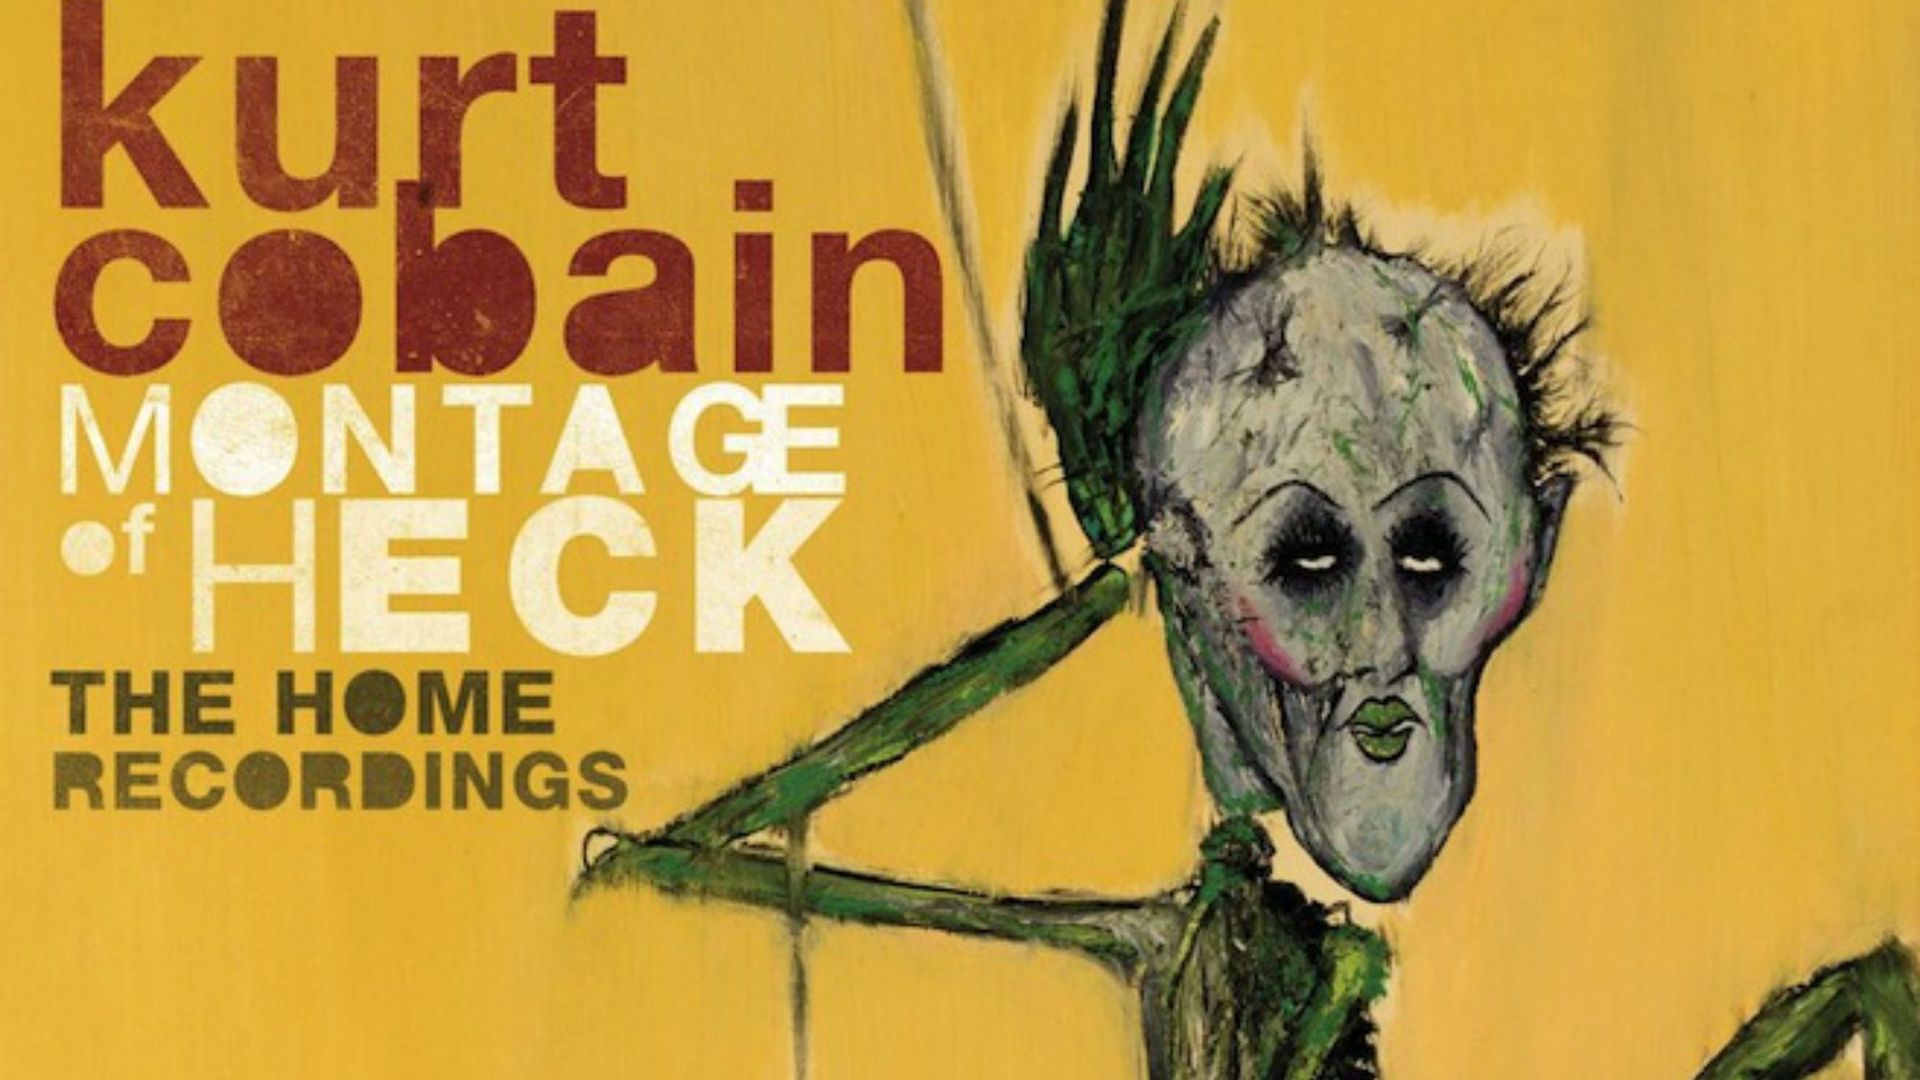 Kurt Cobain, "Montage of Heck : The Home Recordings"